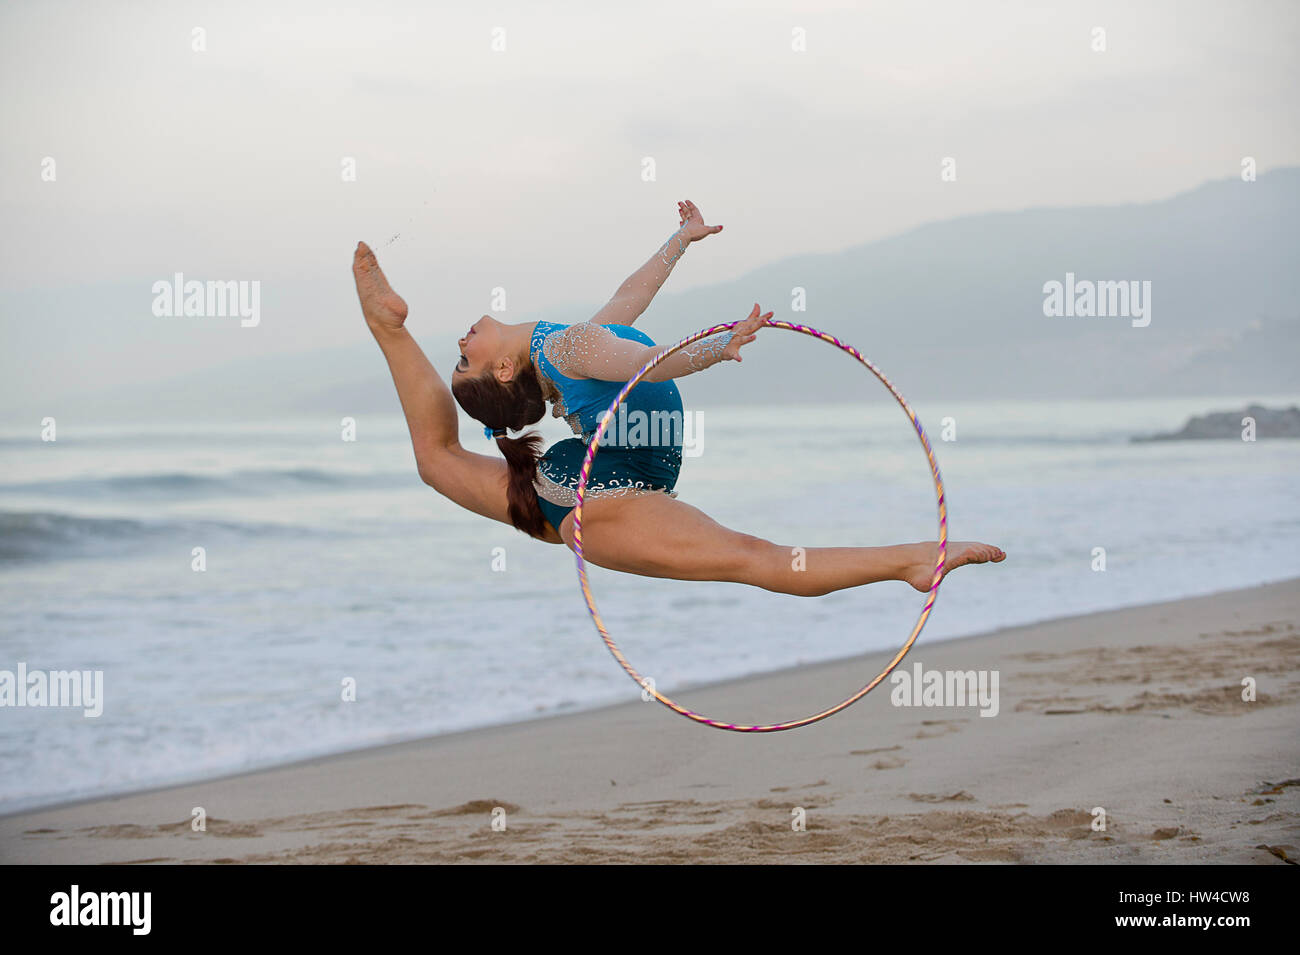 Caucasian gymnast jumping with hoop on beach Stock Photo